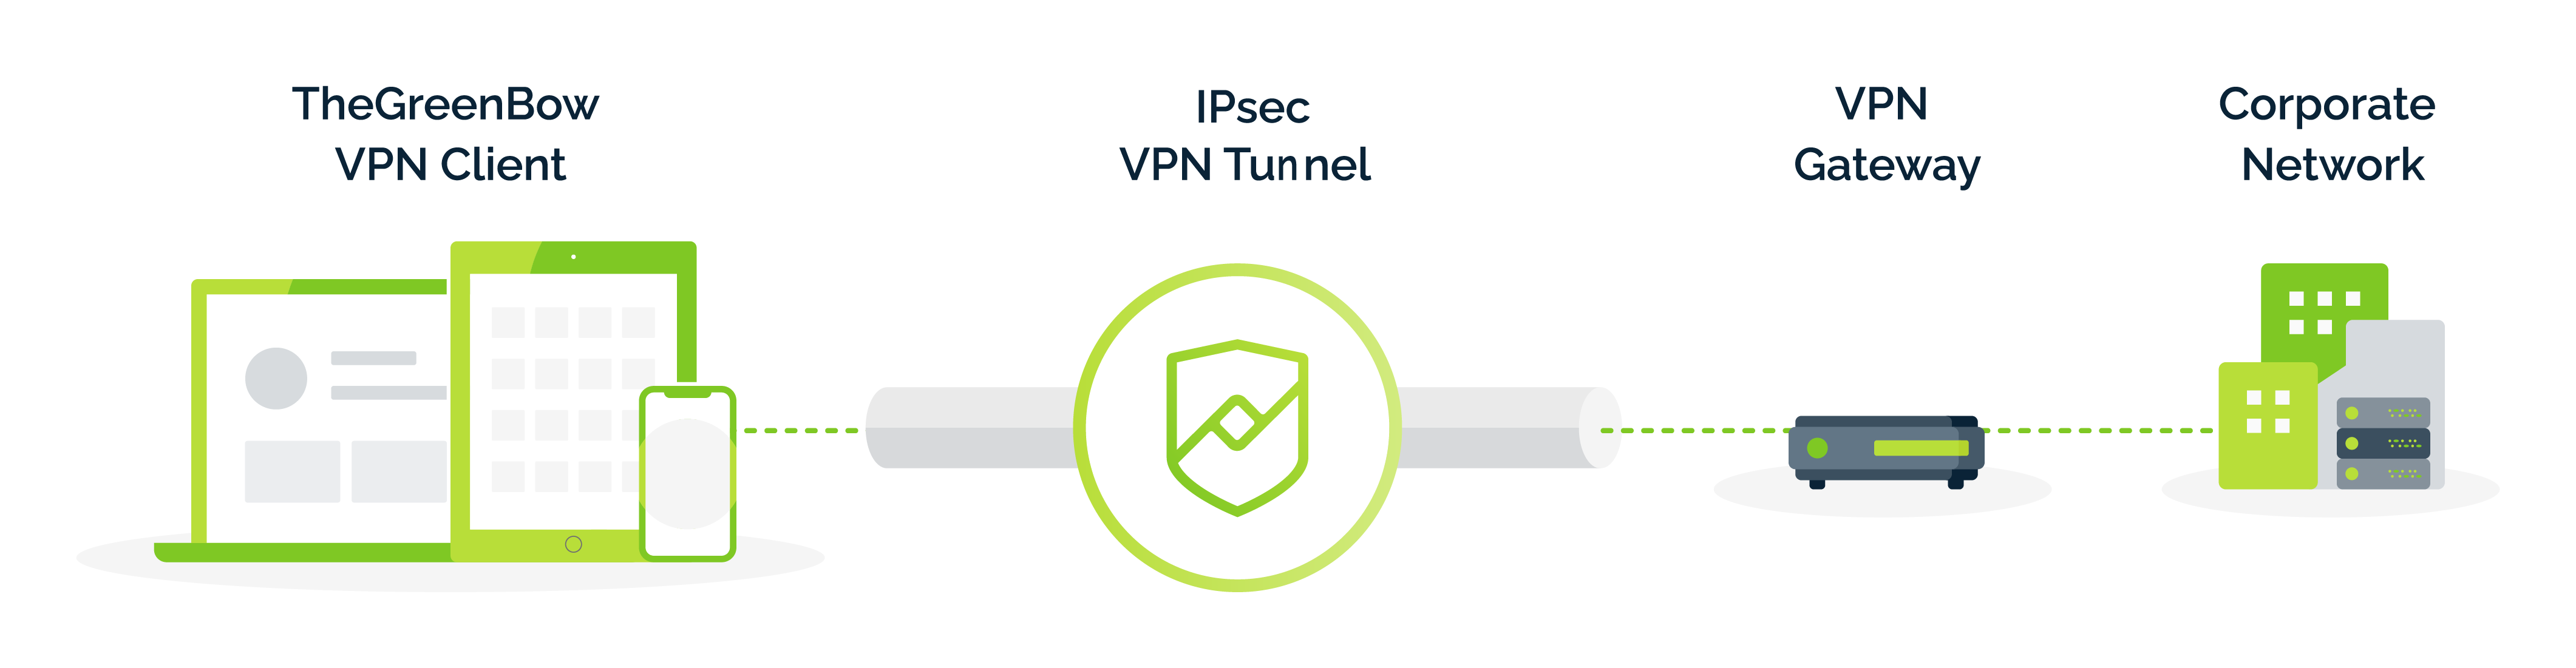 checkpoint endpoint security vpn configuration